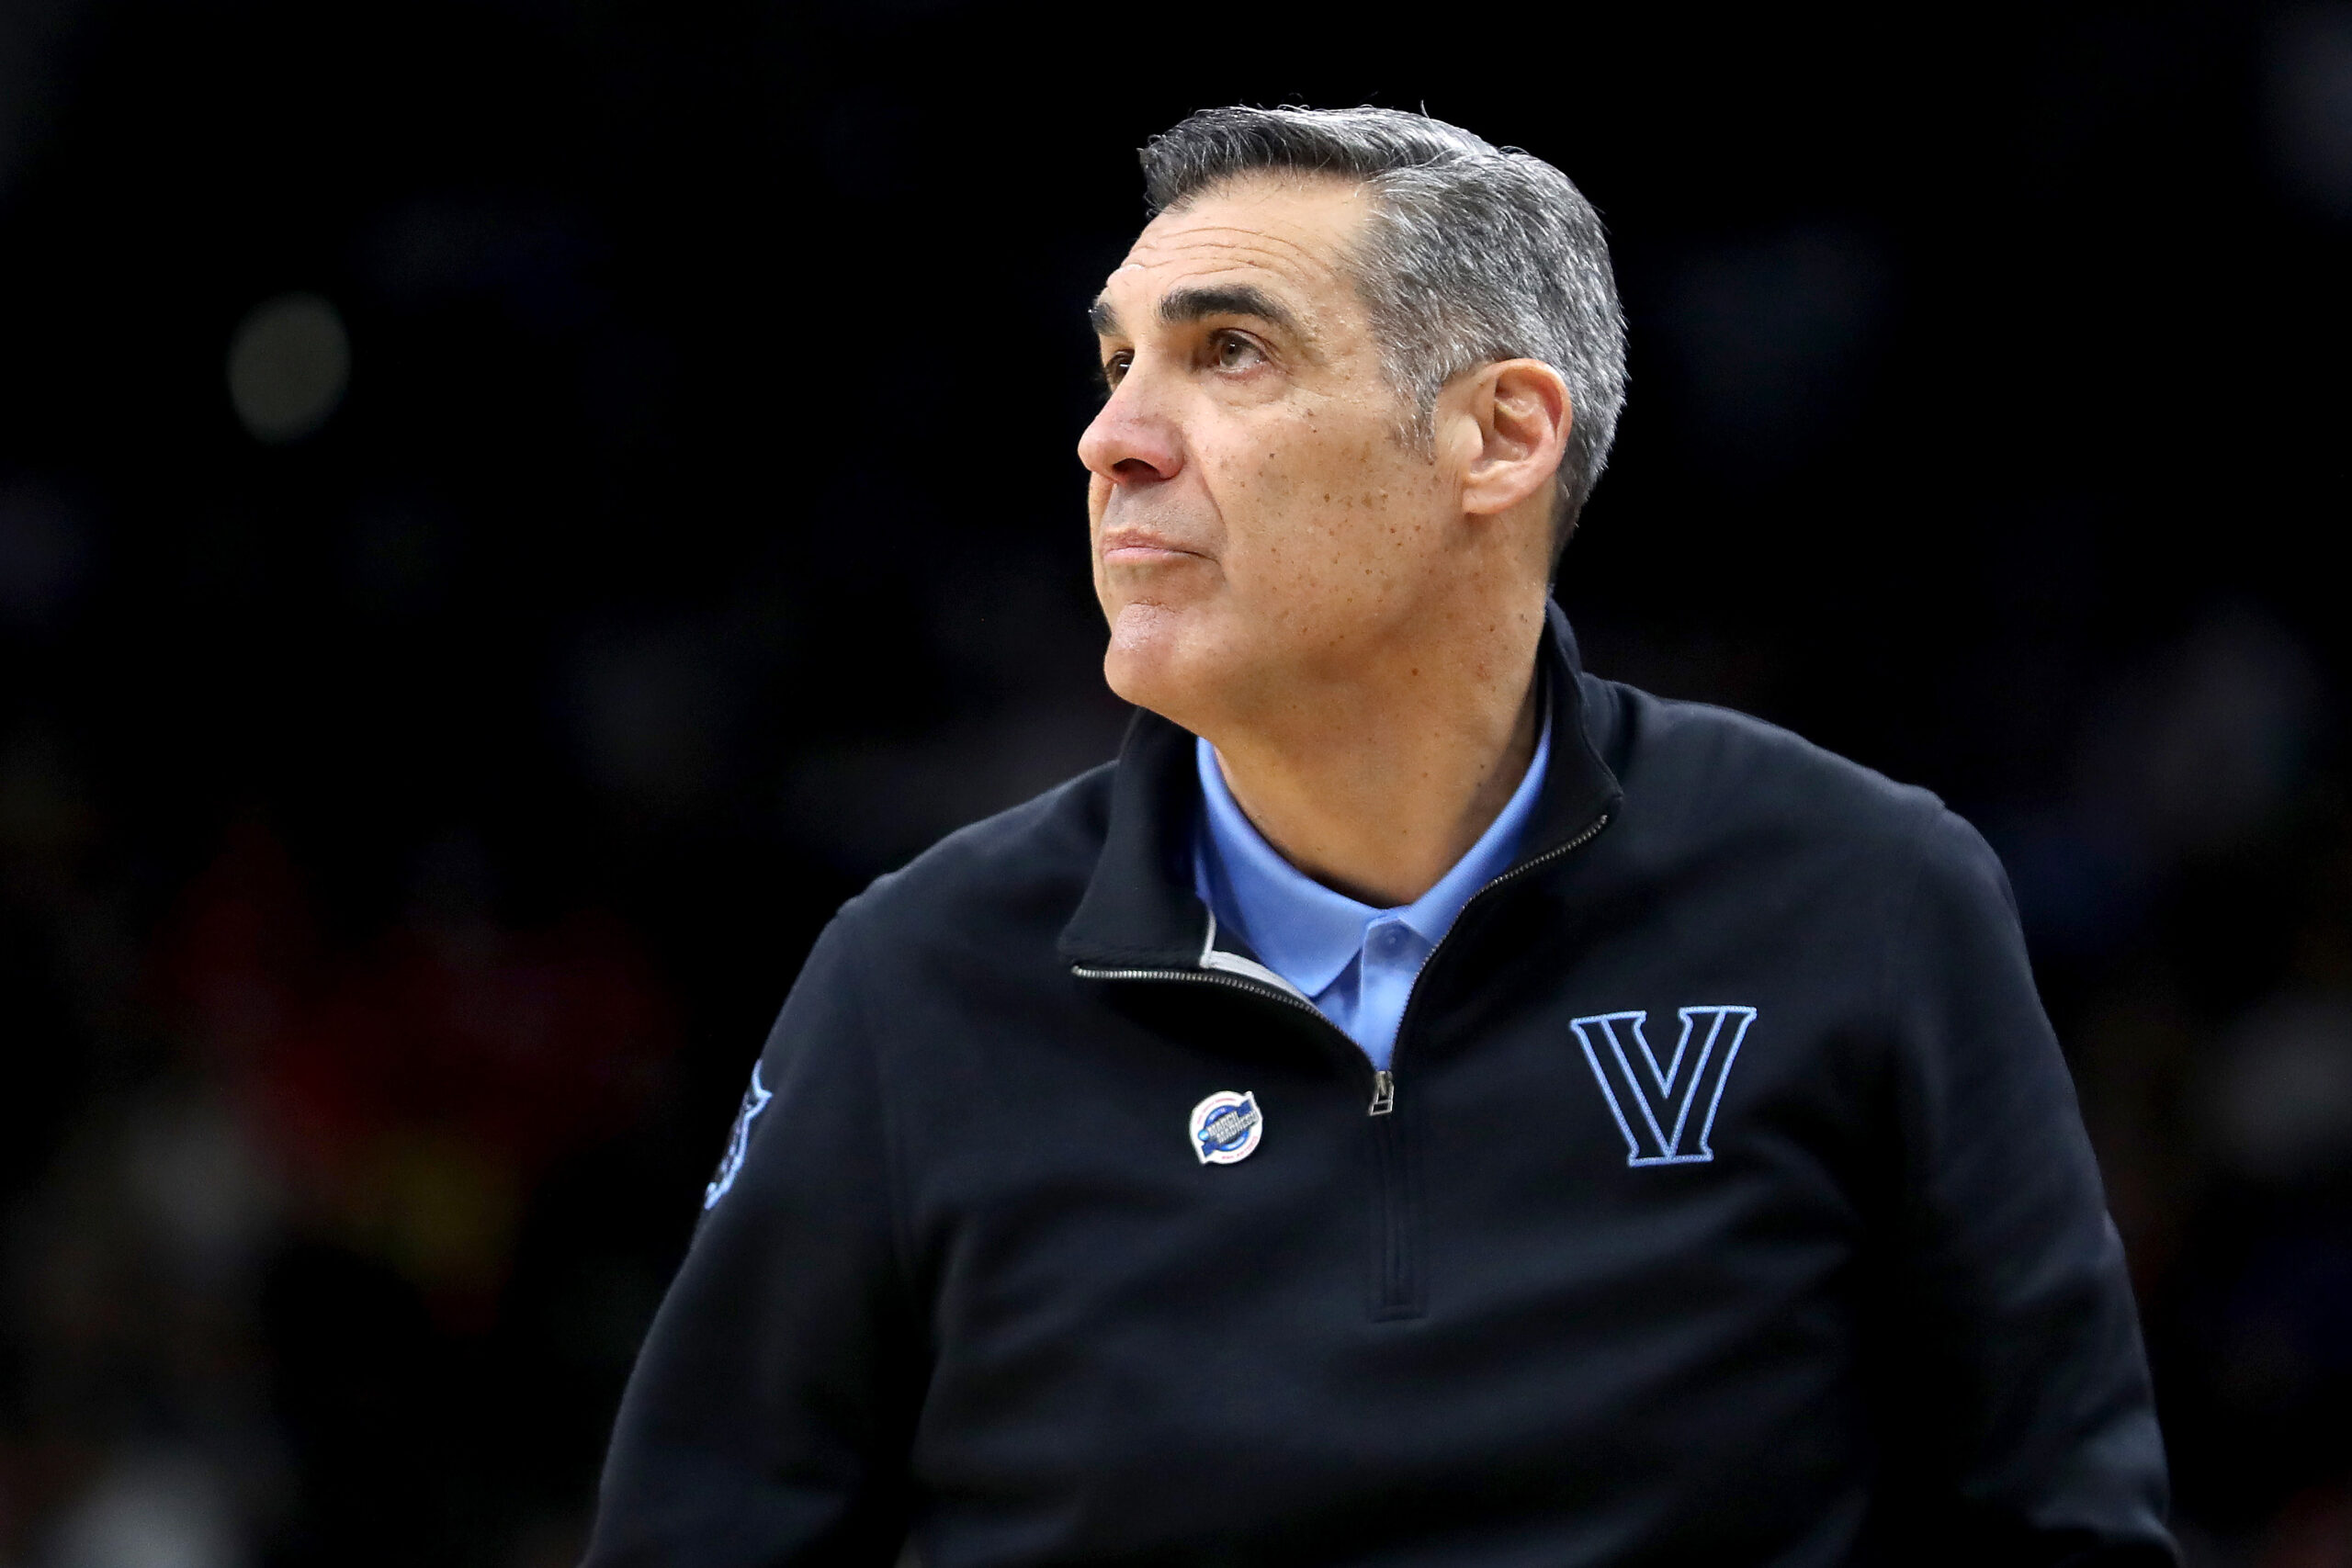 Jay Wright’s reportedly sudden retirement at Villanova shocked the college basketball world